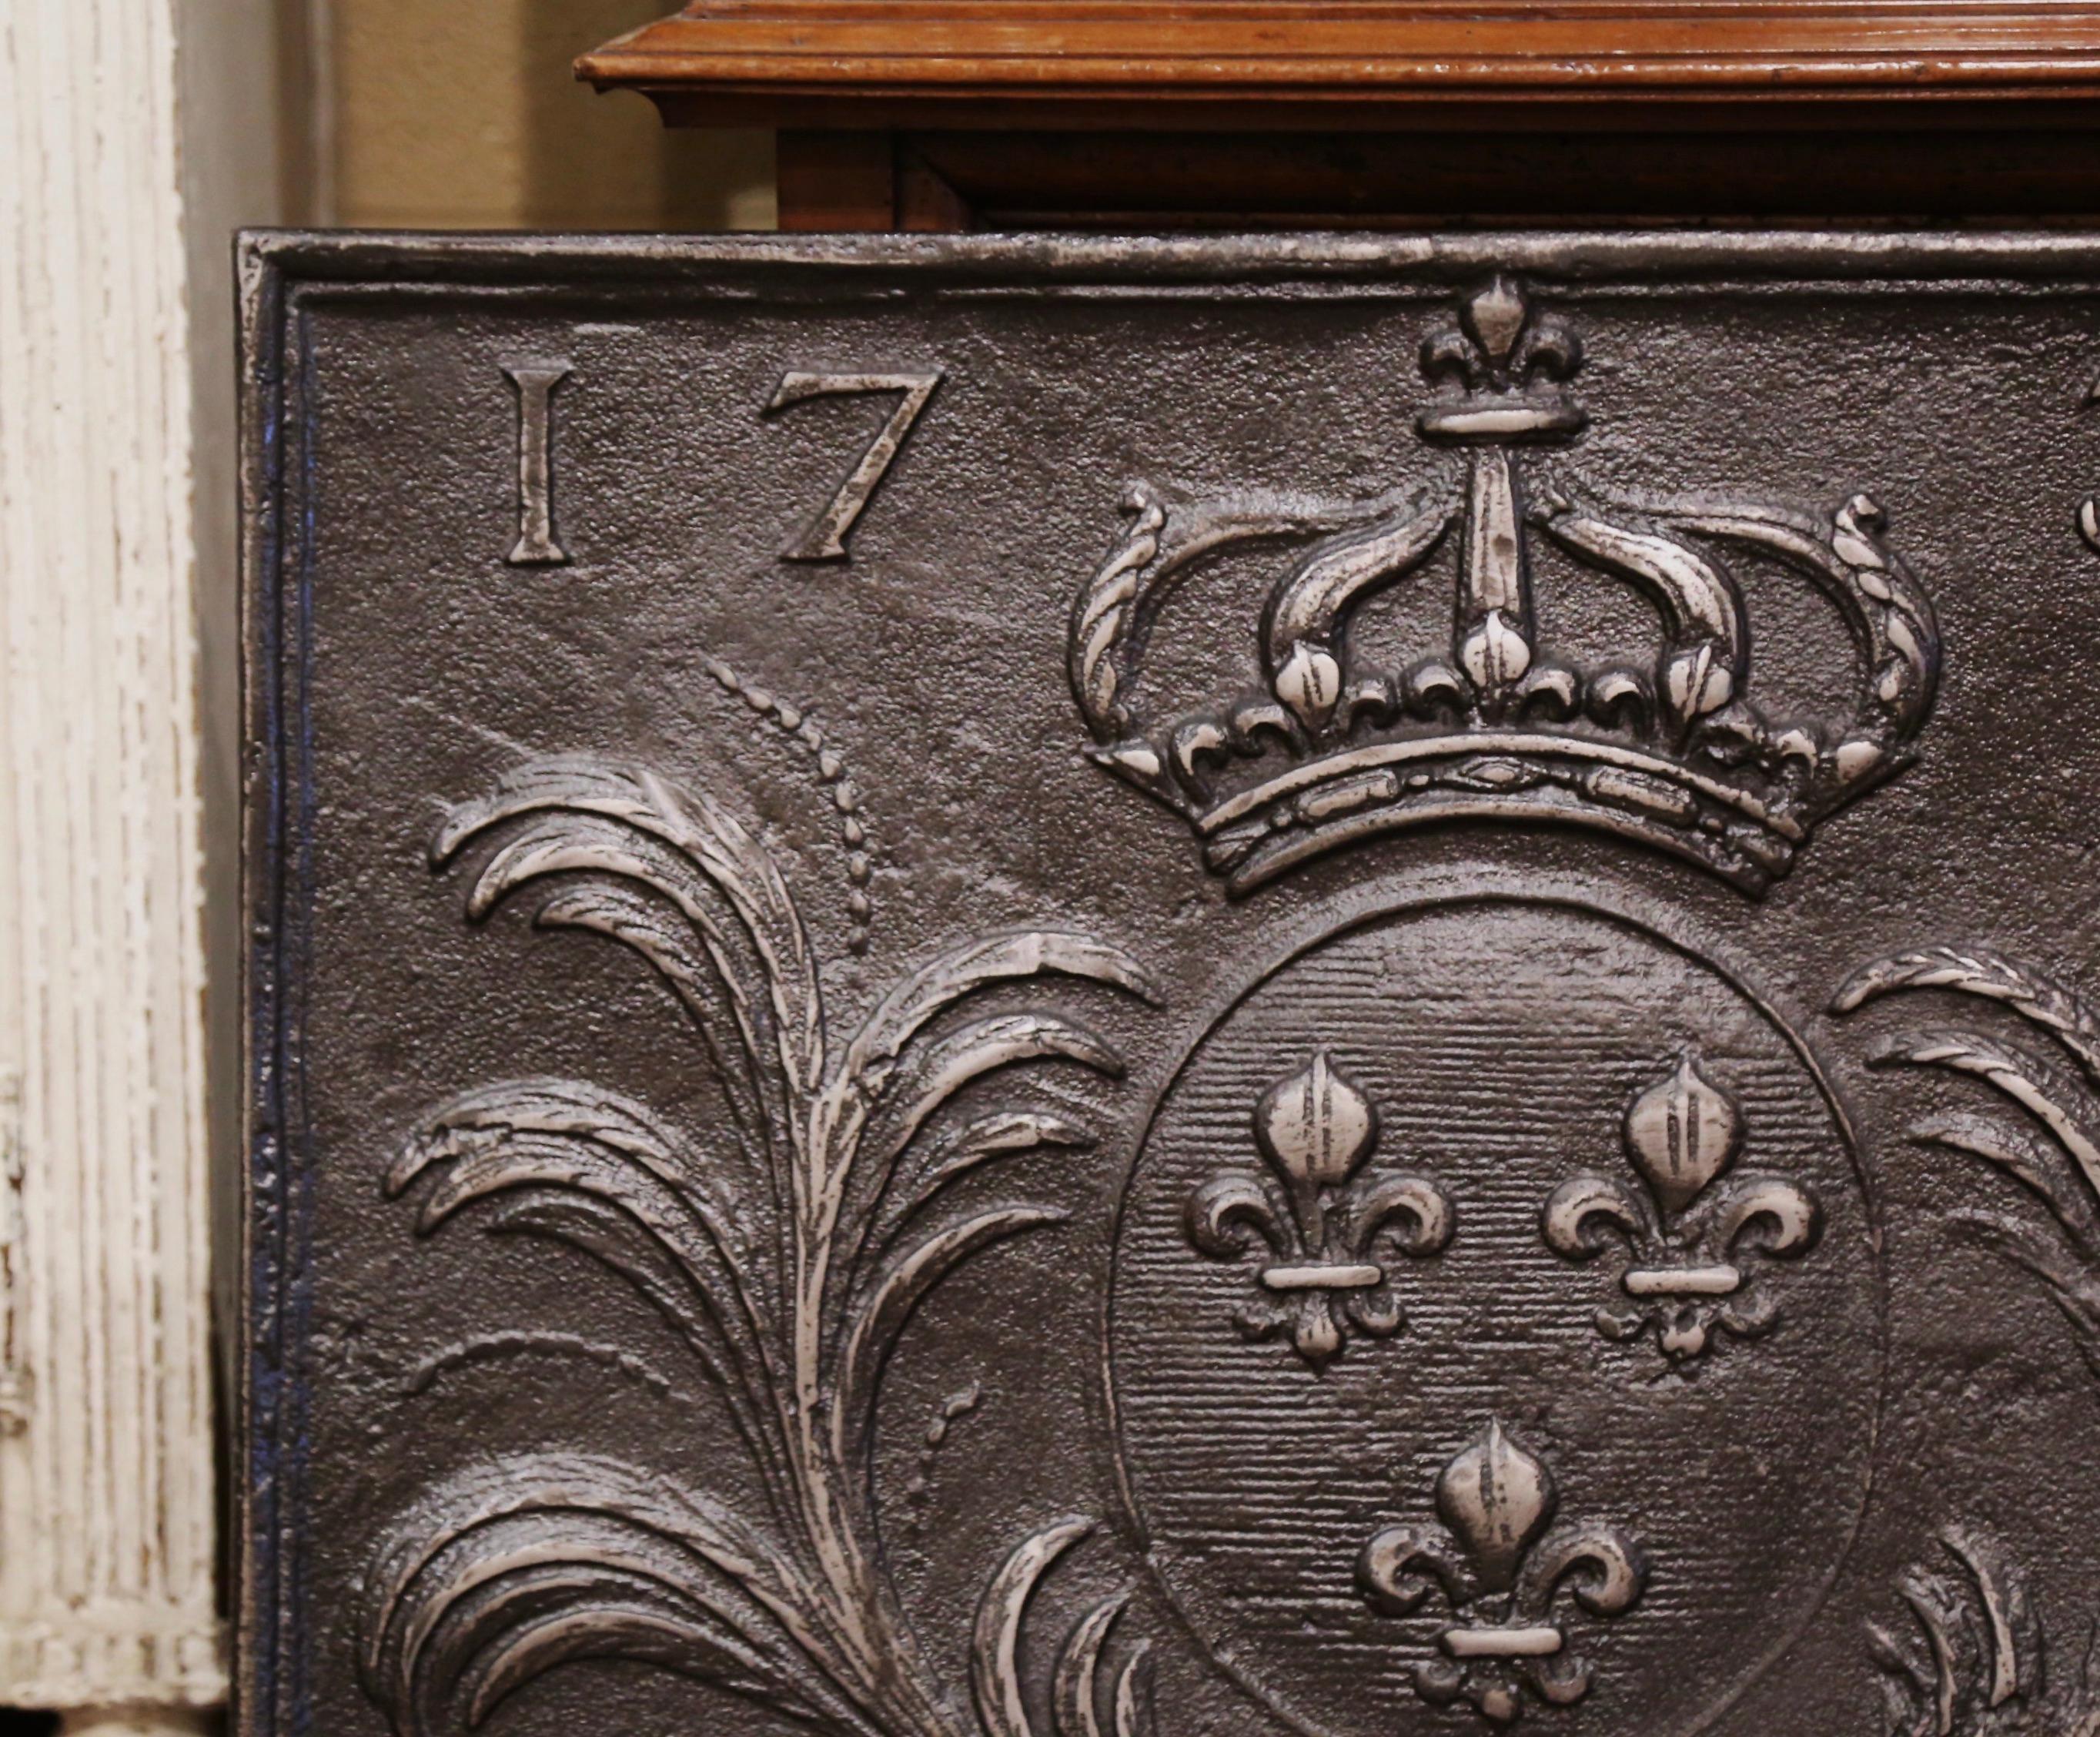 Hand-Crafted 18th Century Polished Iron Fireback with Royal Coat of Arms of France